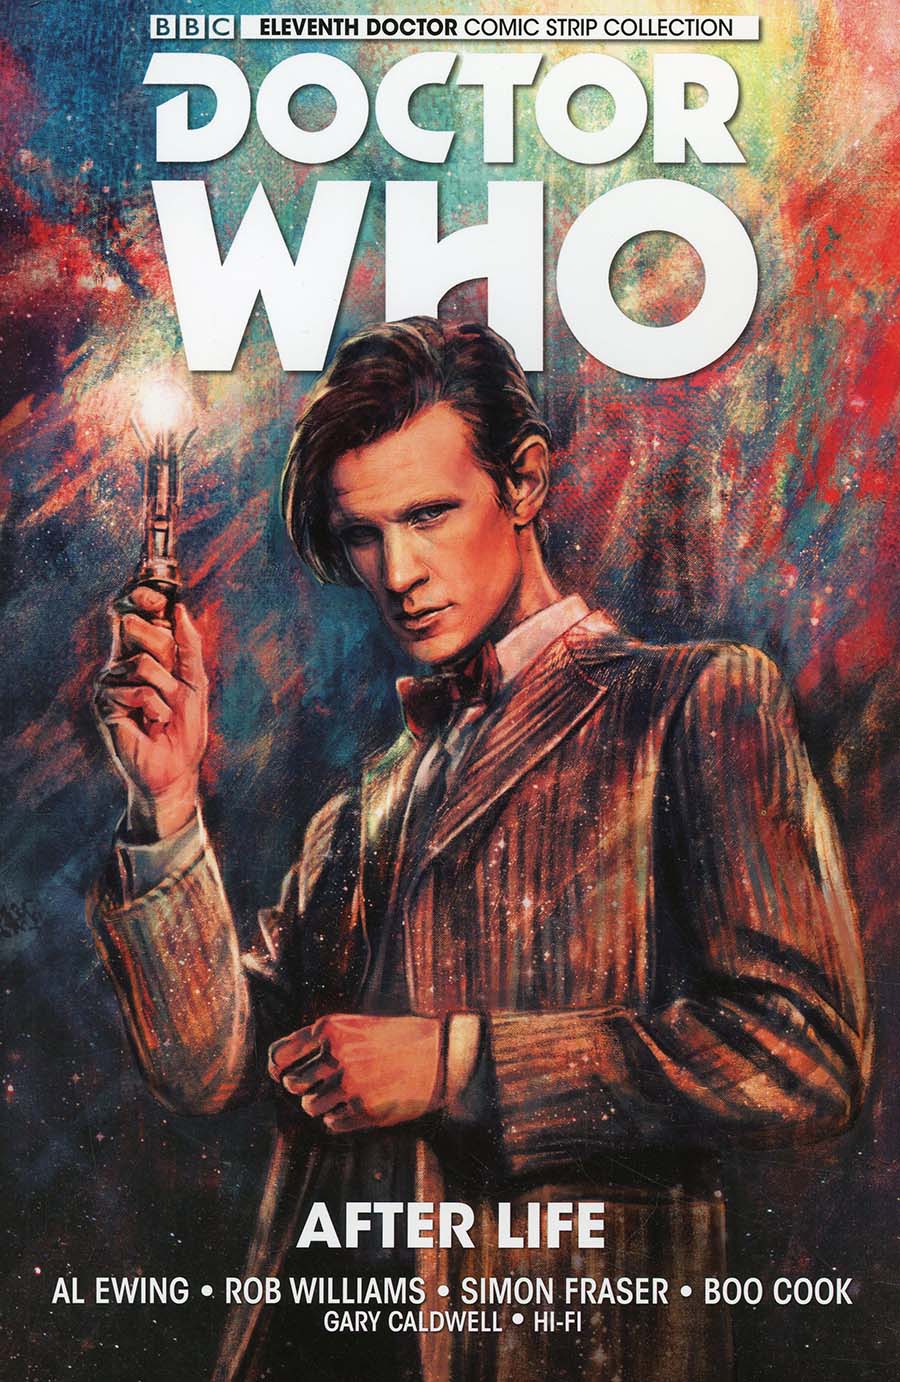 Doctor Who 11th Doctor Vol 1 After Life TP New Edition